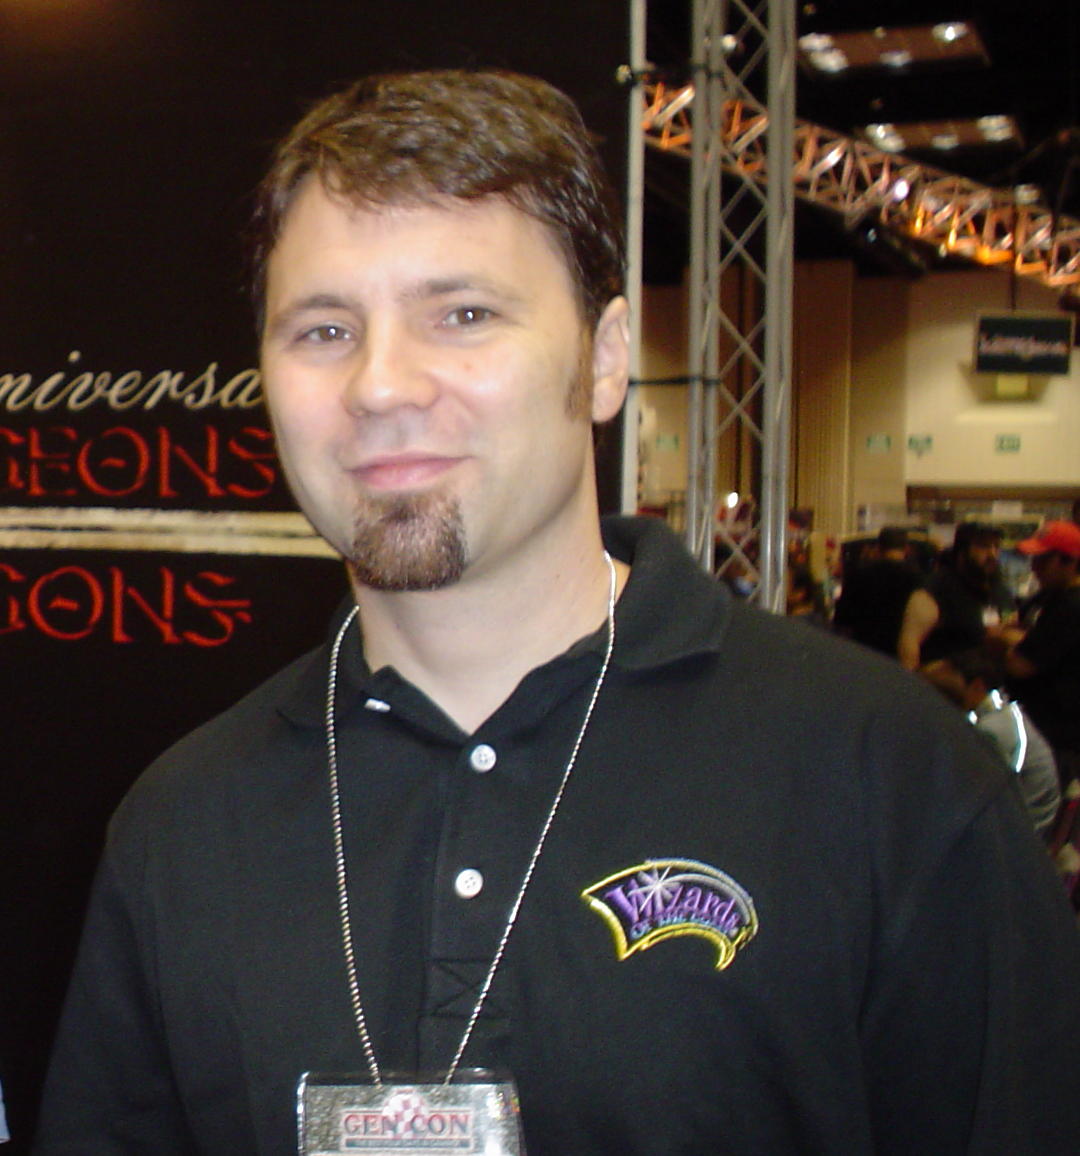 Bruce Cordell at [[Gen Con]] on August 22, 2004